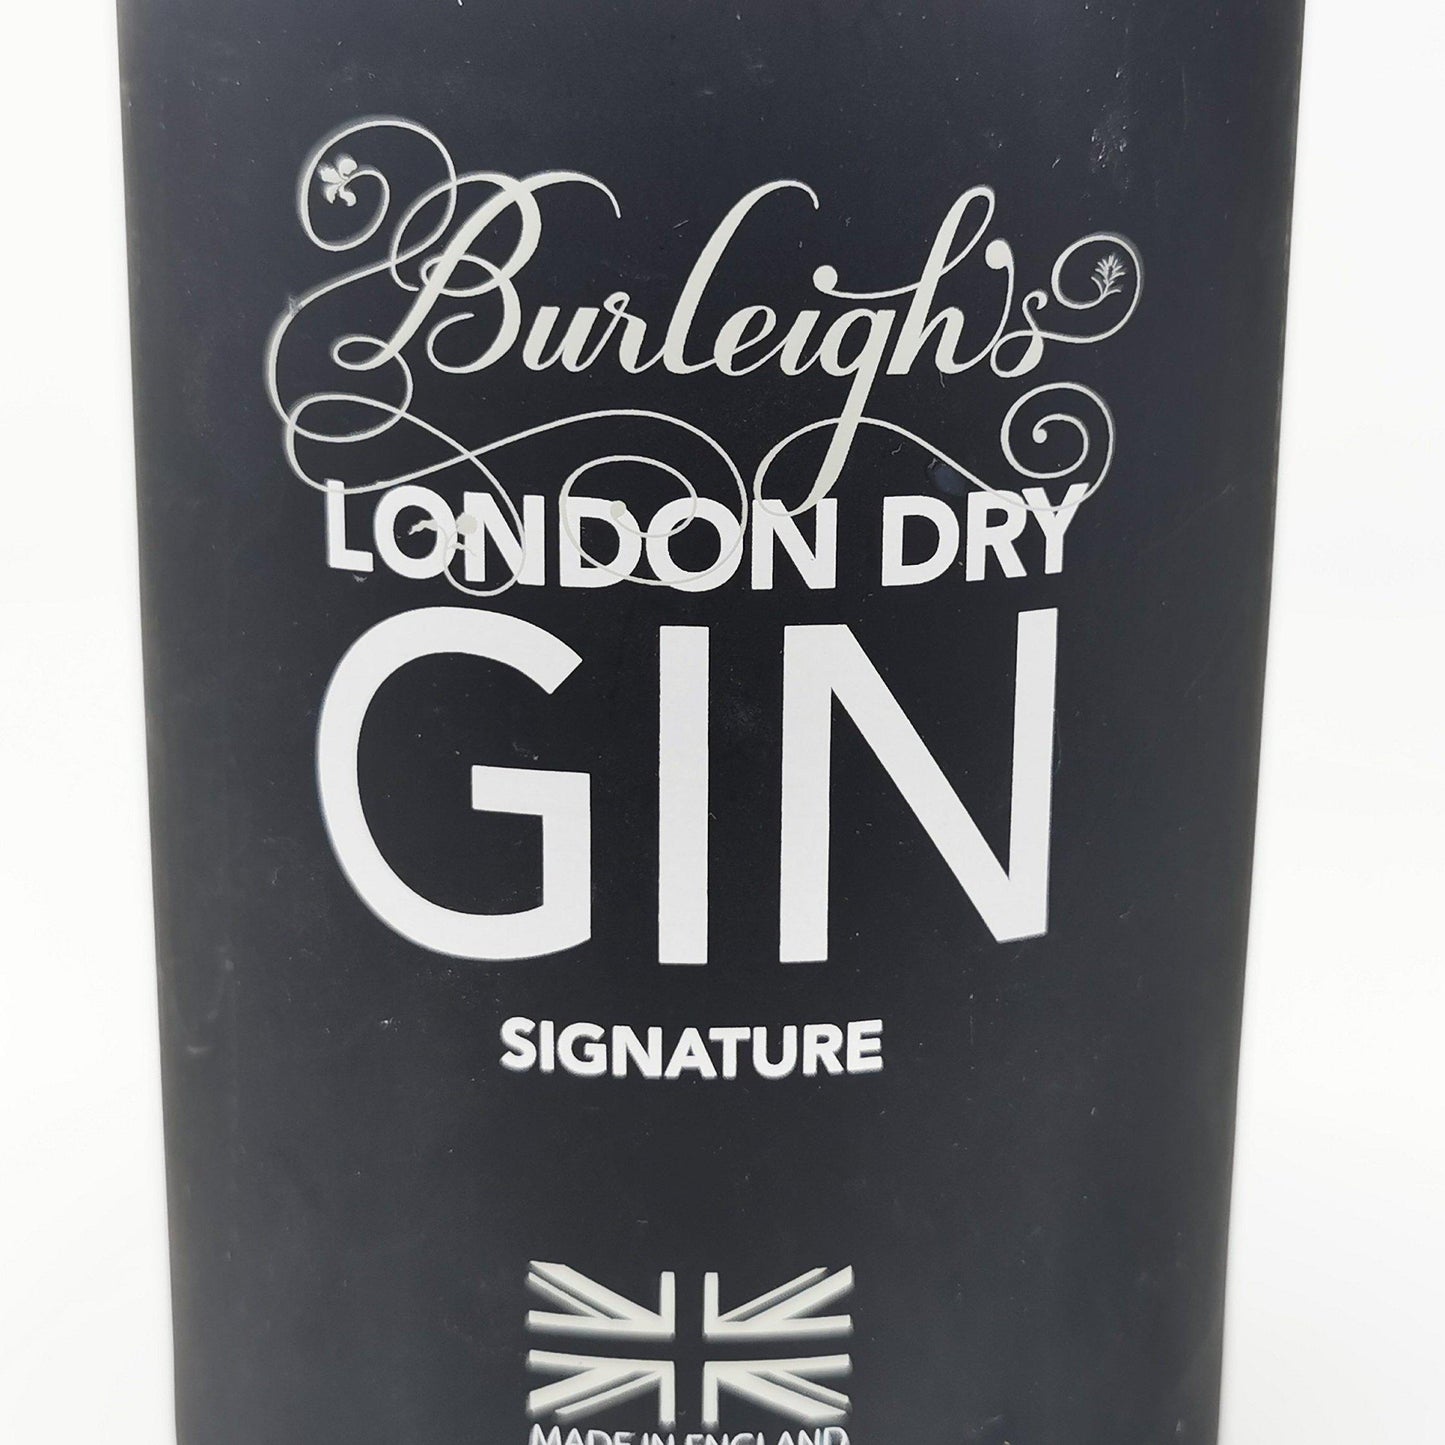 Burleighs Gin Bottle Candle Gin Bottle Candles Adhock Homeware